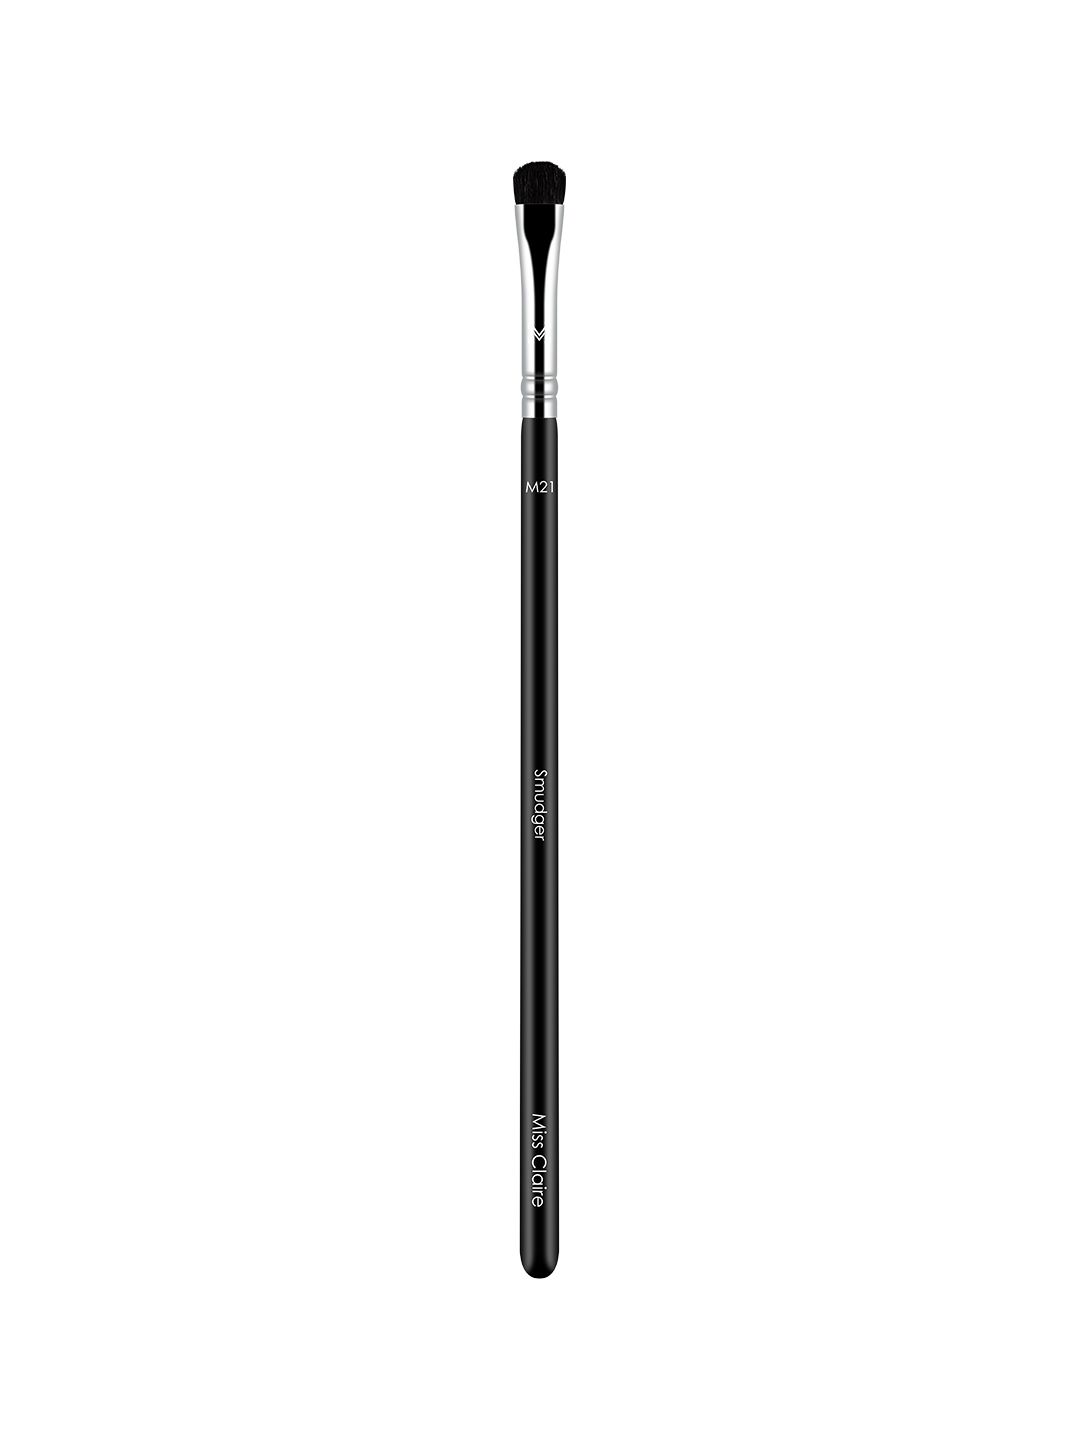 Miss Claire M21 - Smudger Eye Brush - Silver-Toned & Black Price in India